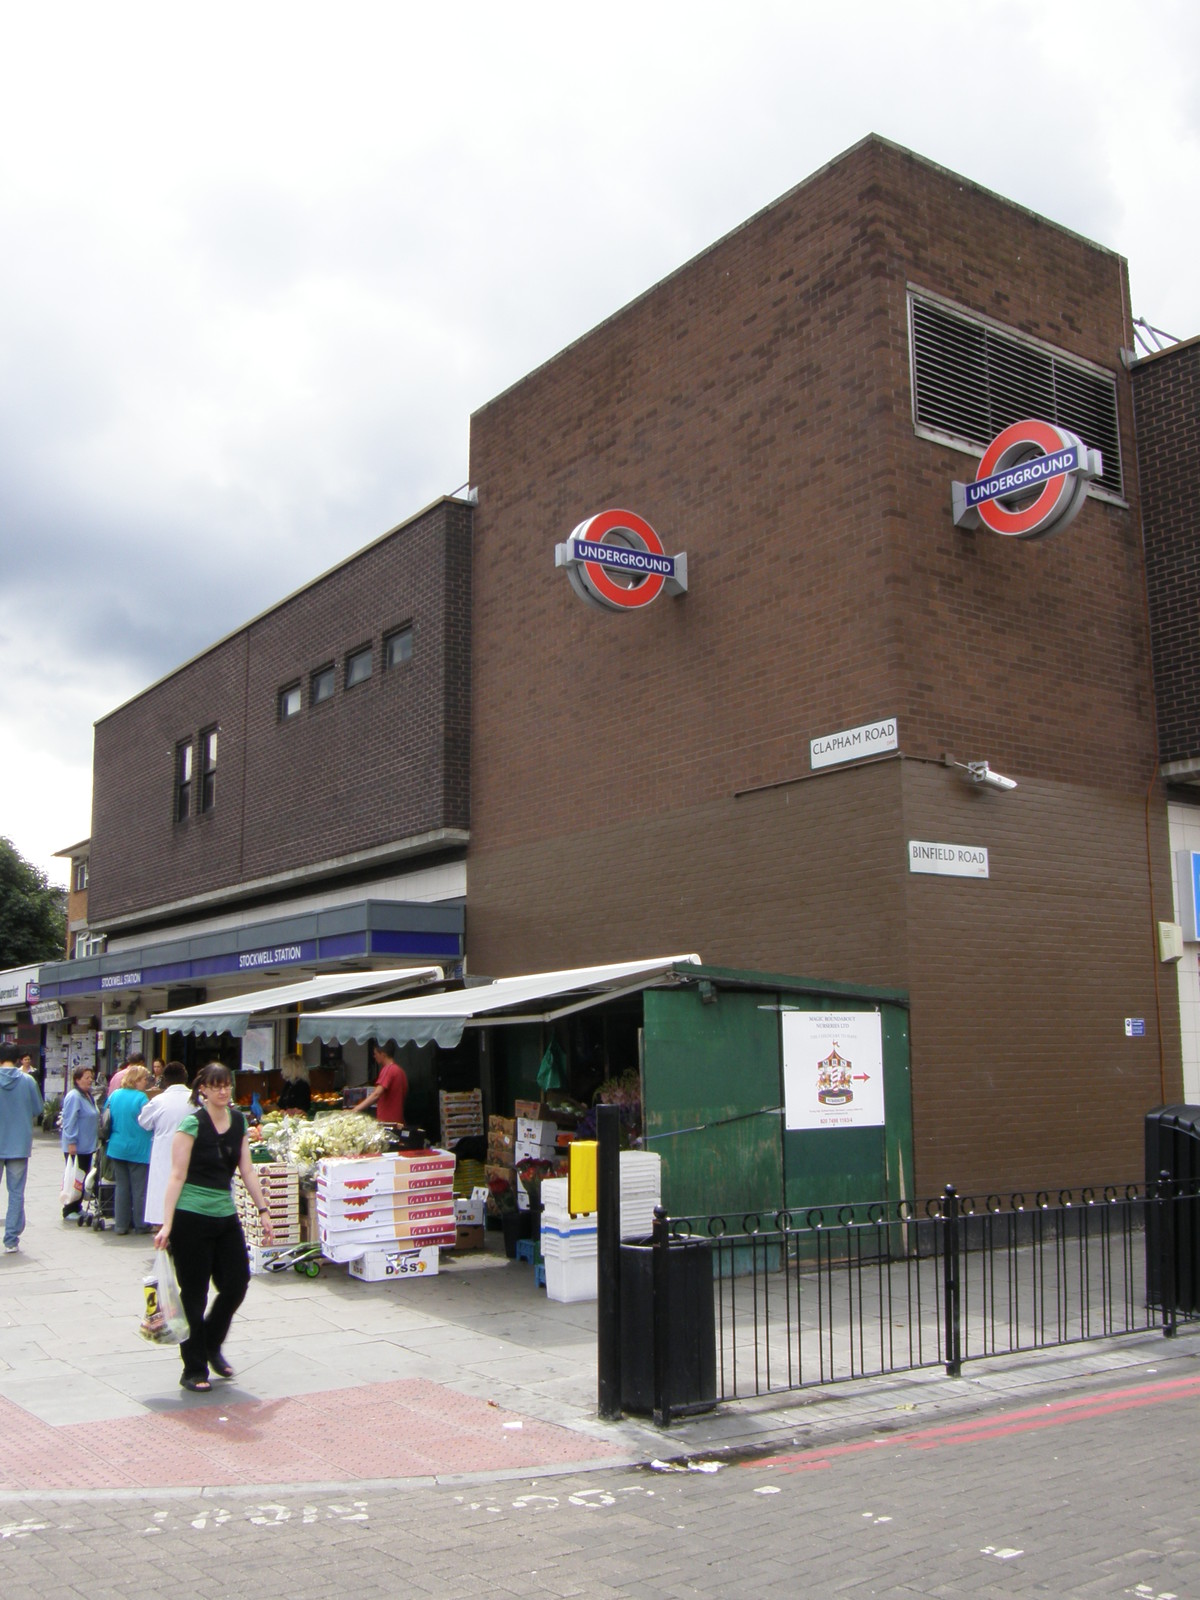 Image from Morden to Kennington